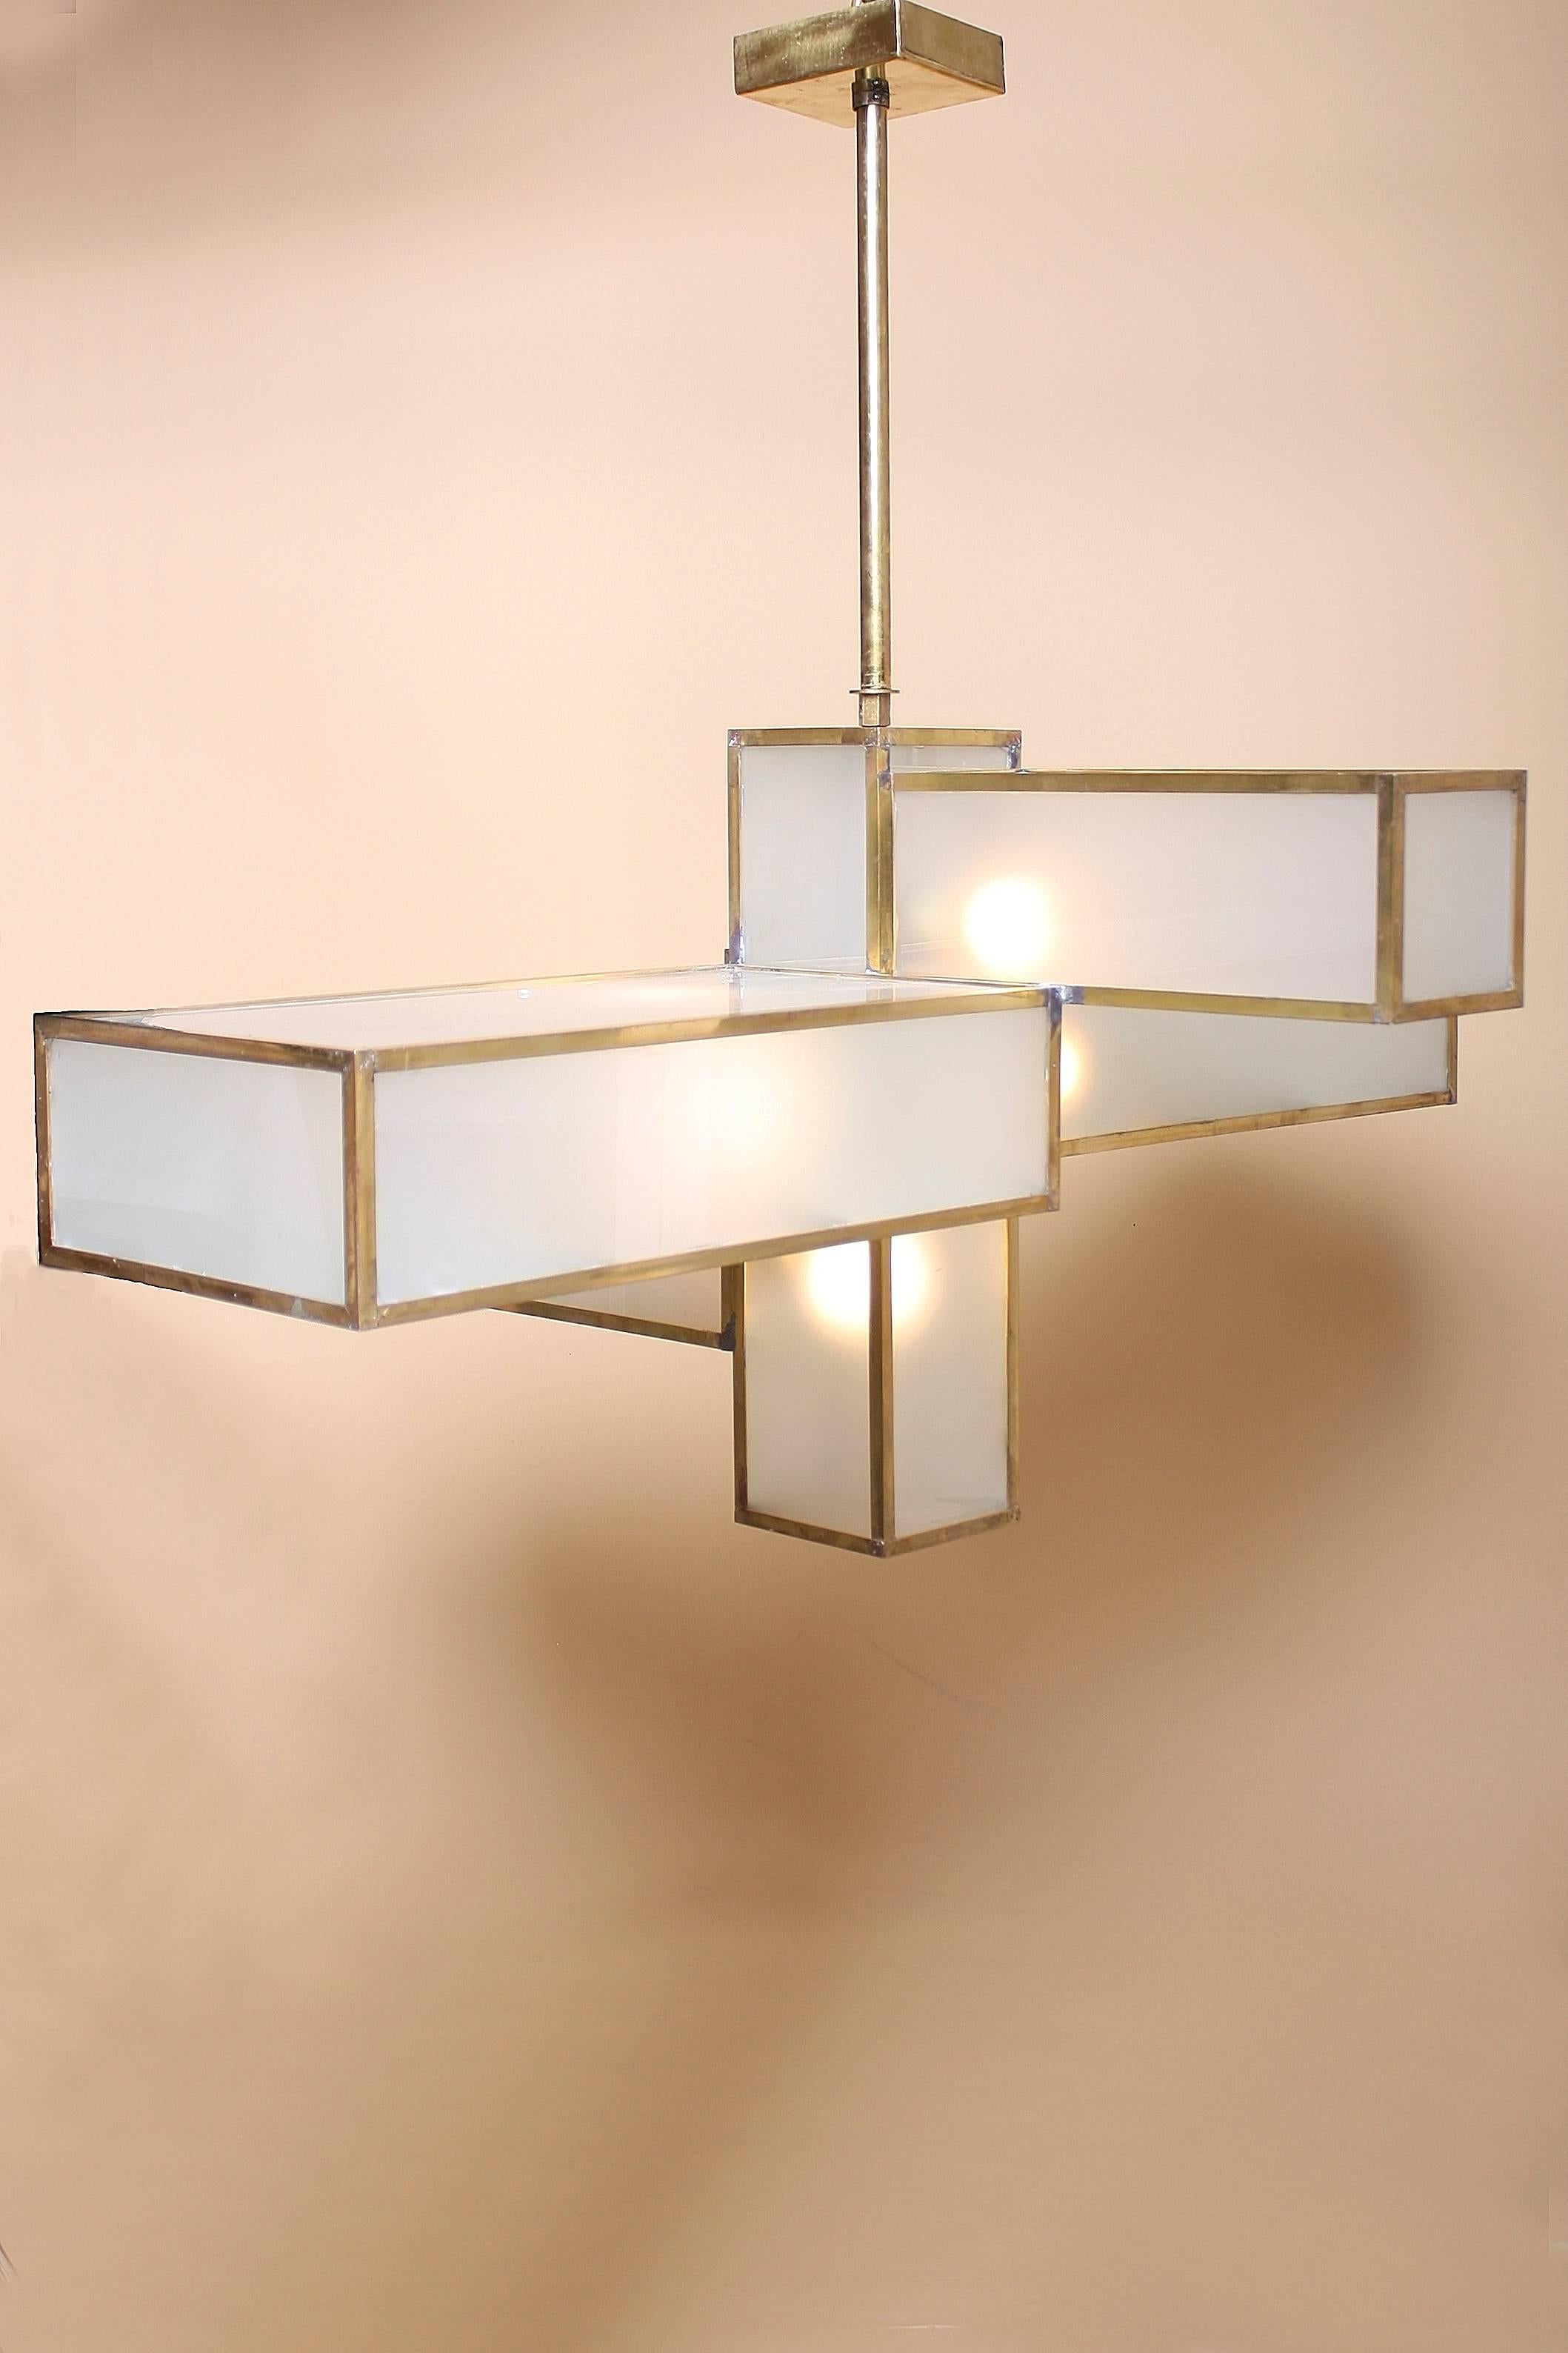 Mid-20th Century Geometric Glass and Brass Chandelier Attributed to Jean Perzel For Sale